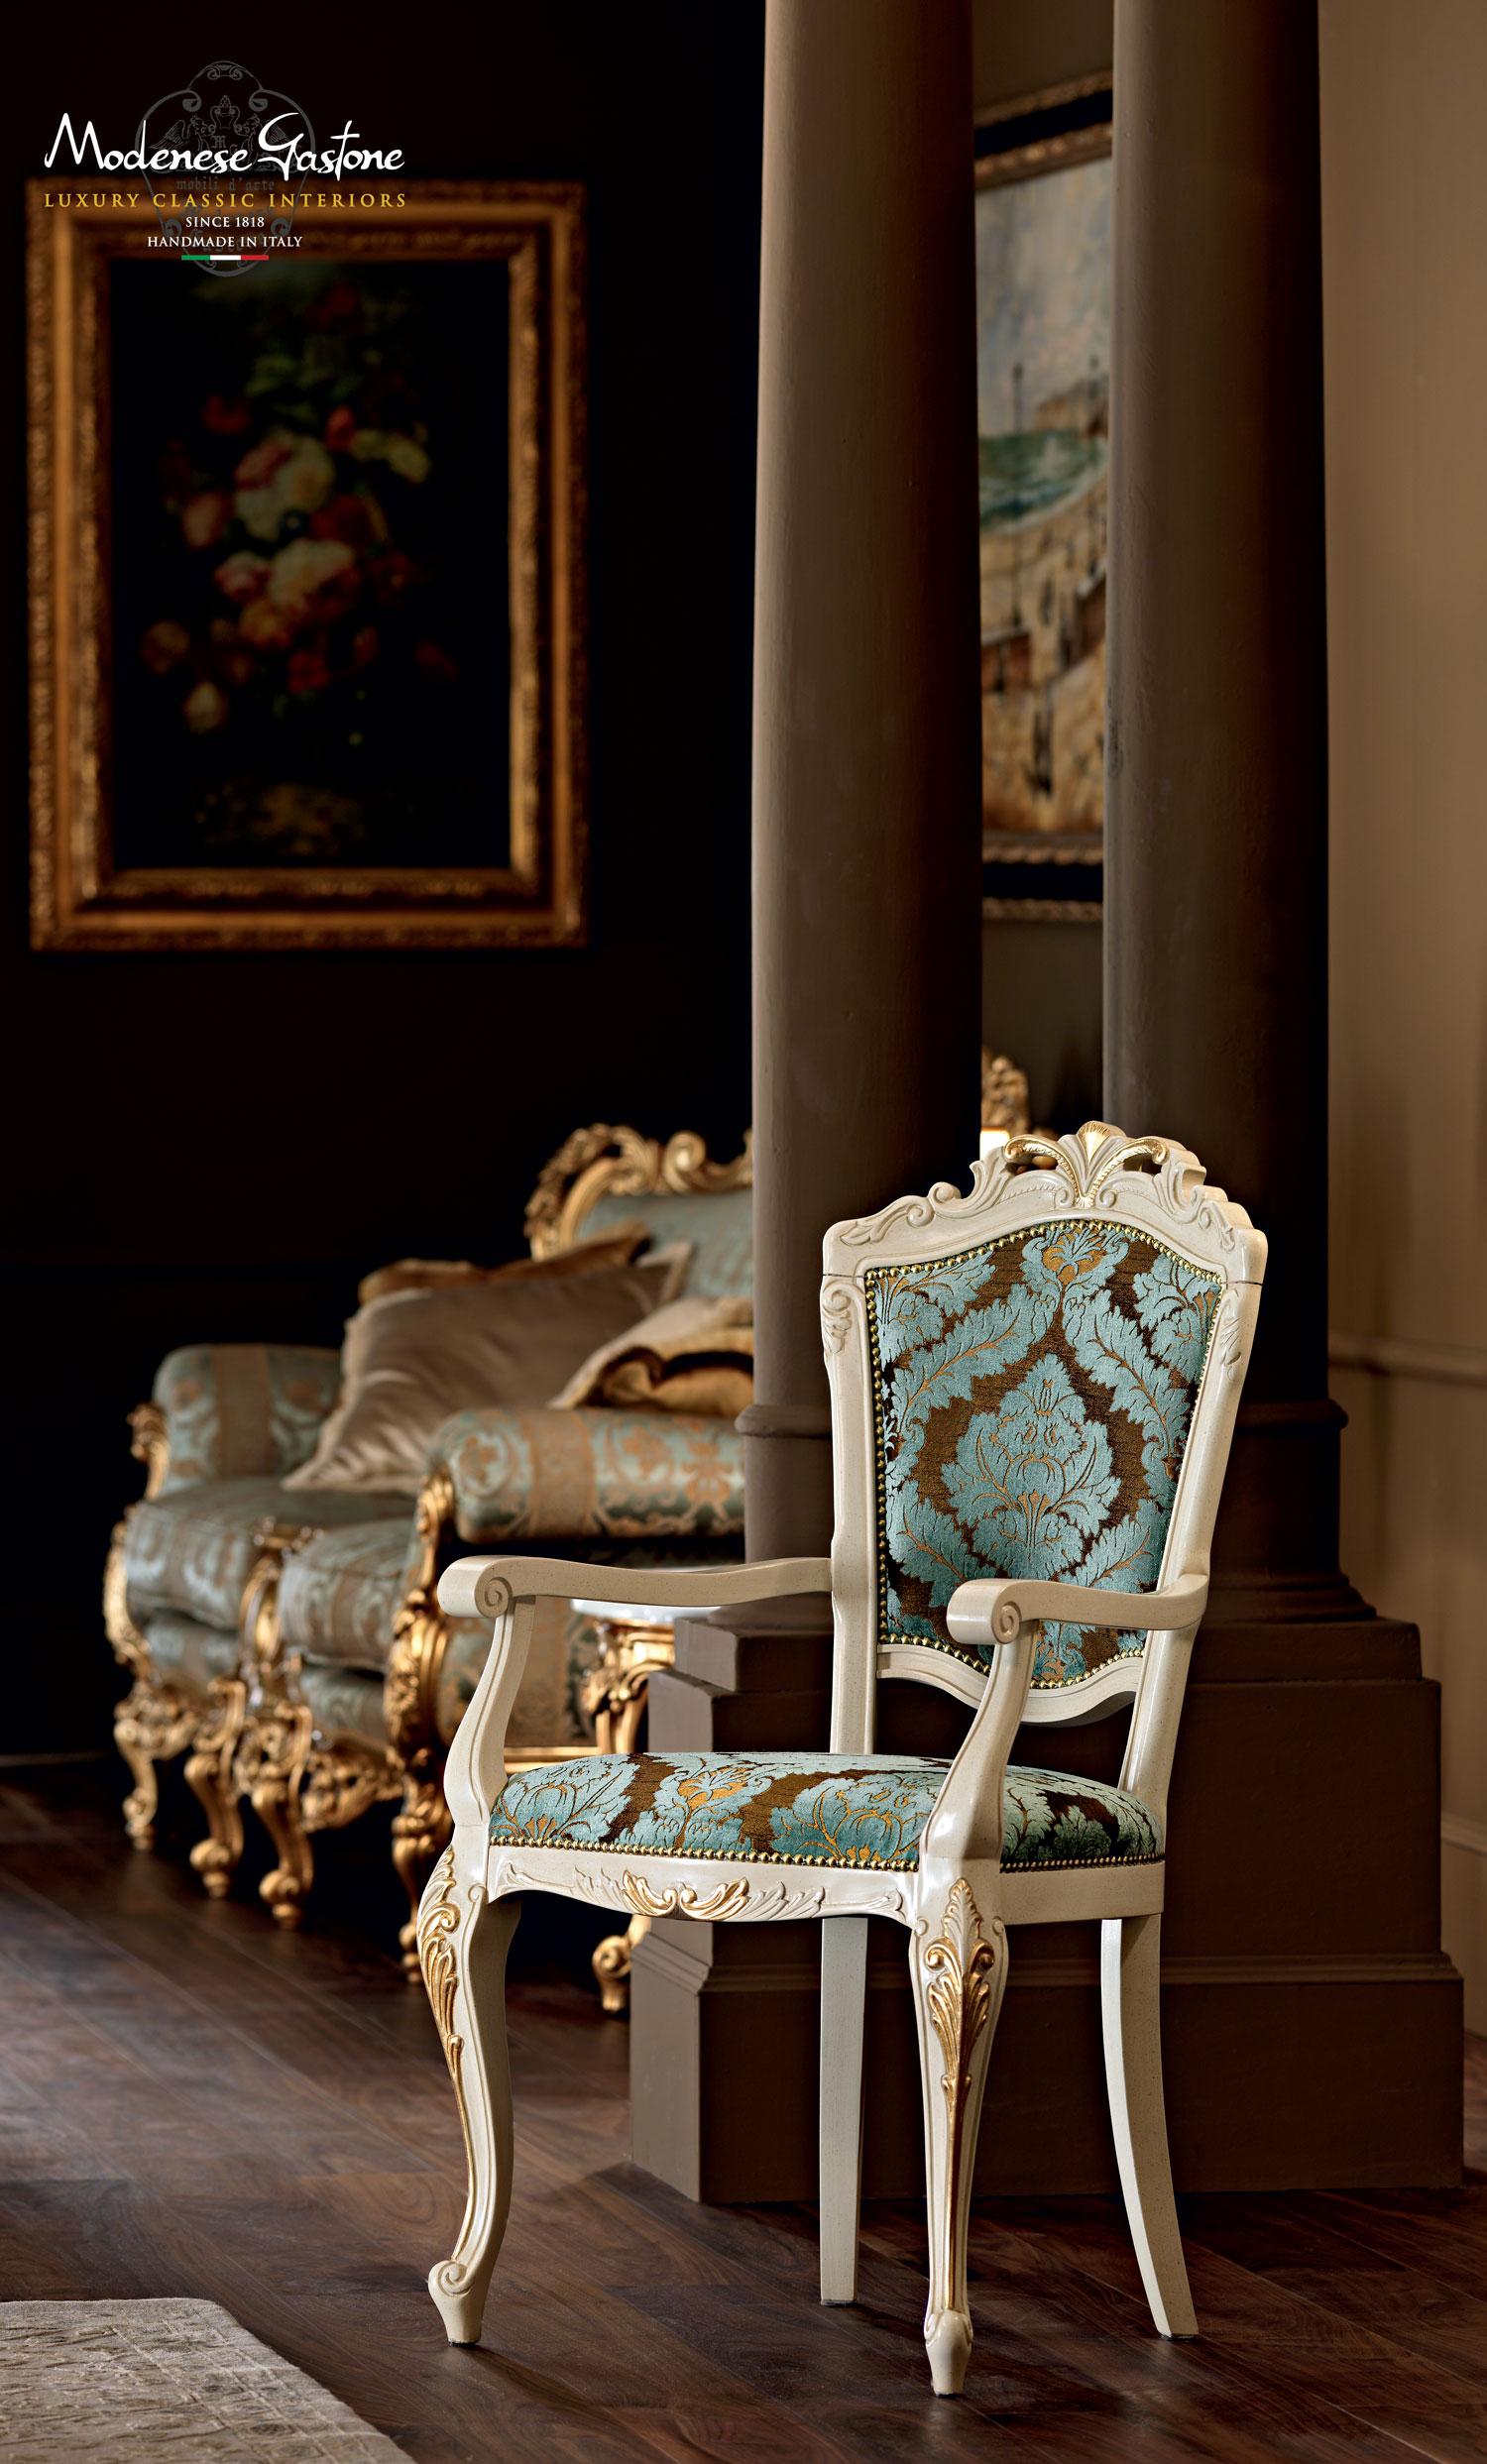 Complete your elegant luxury dining room by pairing your home décor with this victorian high-end side chair by Modenese gastone, featuring a wood frame painted in ivory finishings and hand made gold leaf applications. Seating cushion upholstered in